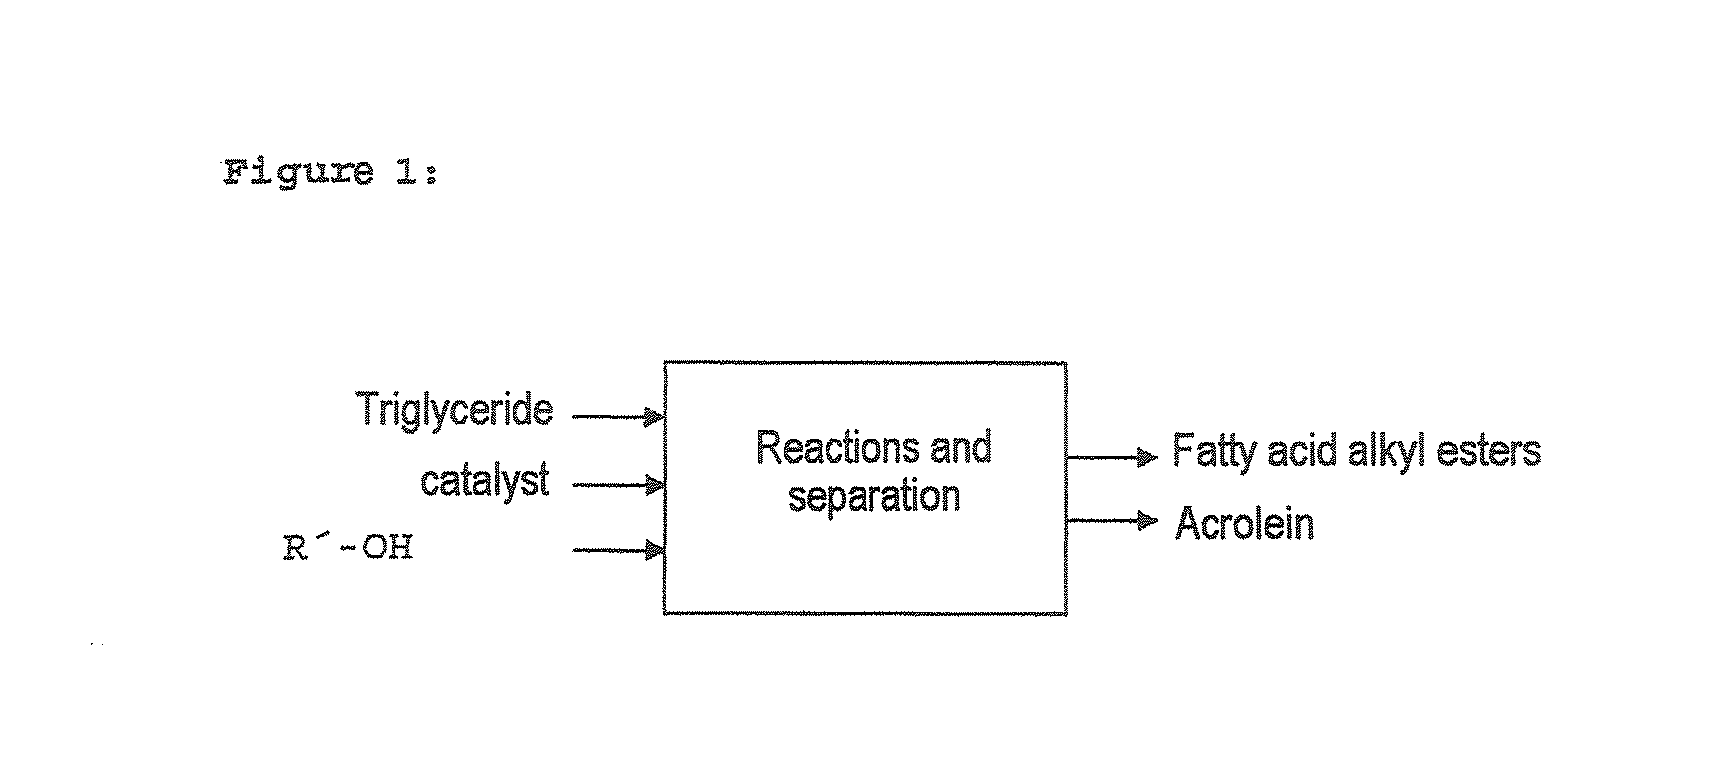 Process for preparing fatty acid alkyl esters and acrolein from triglycerides